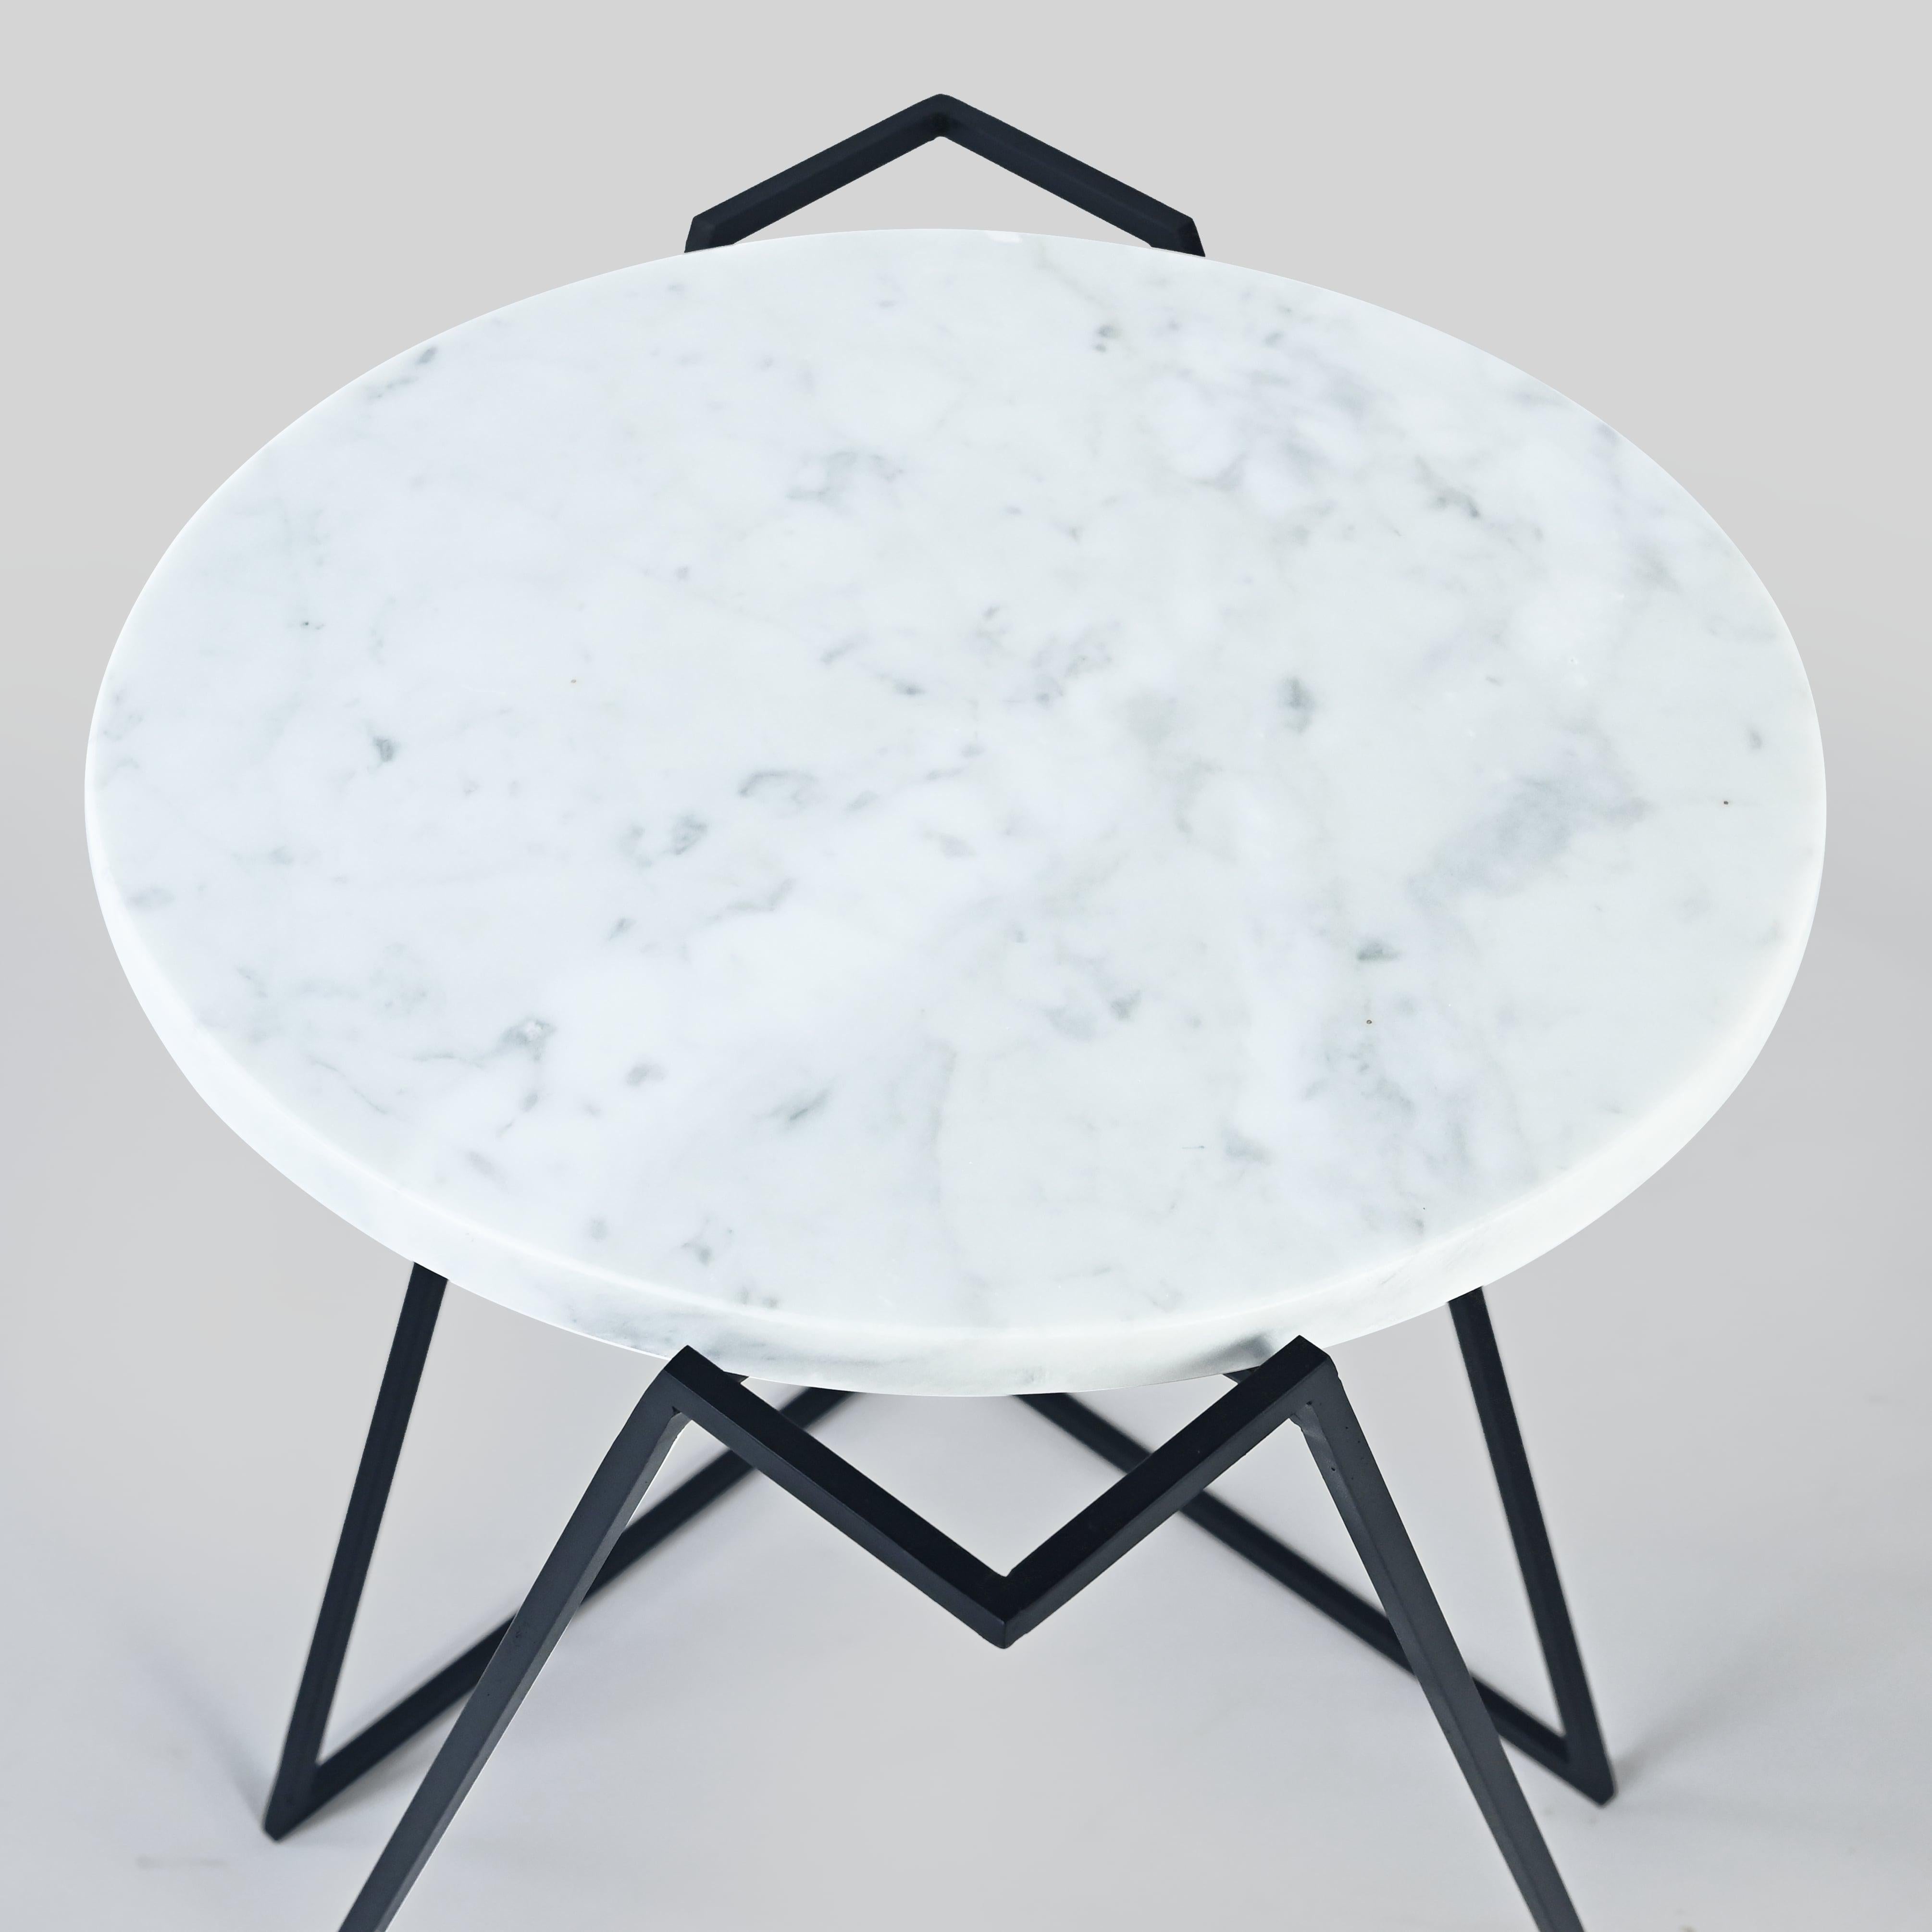 Saturno, Carrara Marble Side Table By DFdesignlab Handmade in Italy In New Condition For Sale In Campobasso, CB